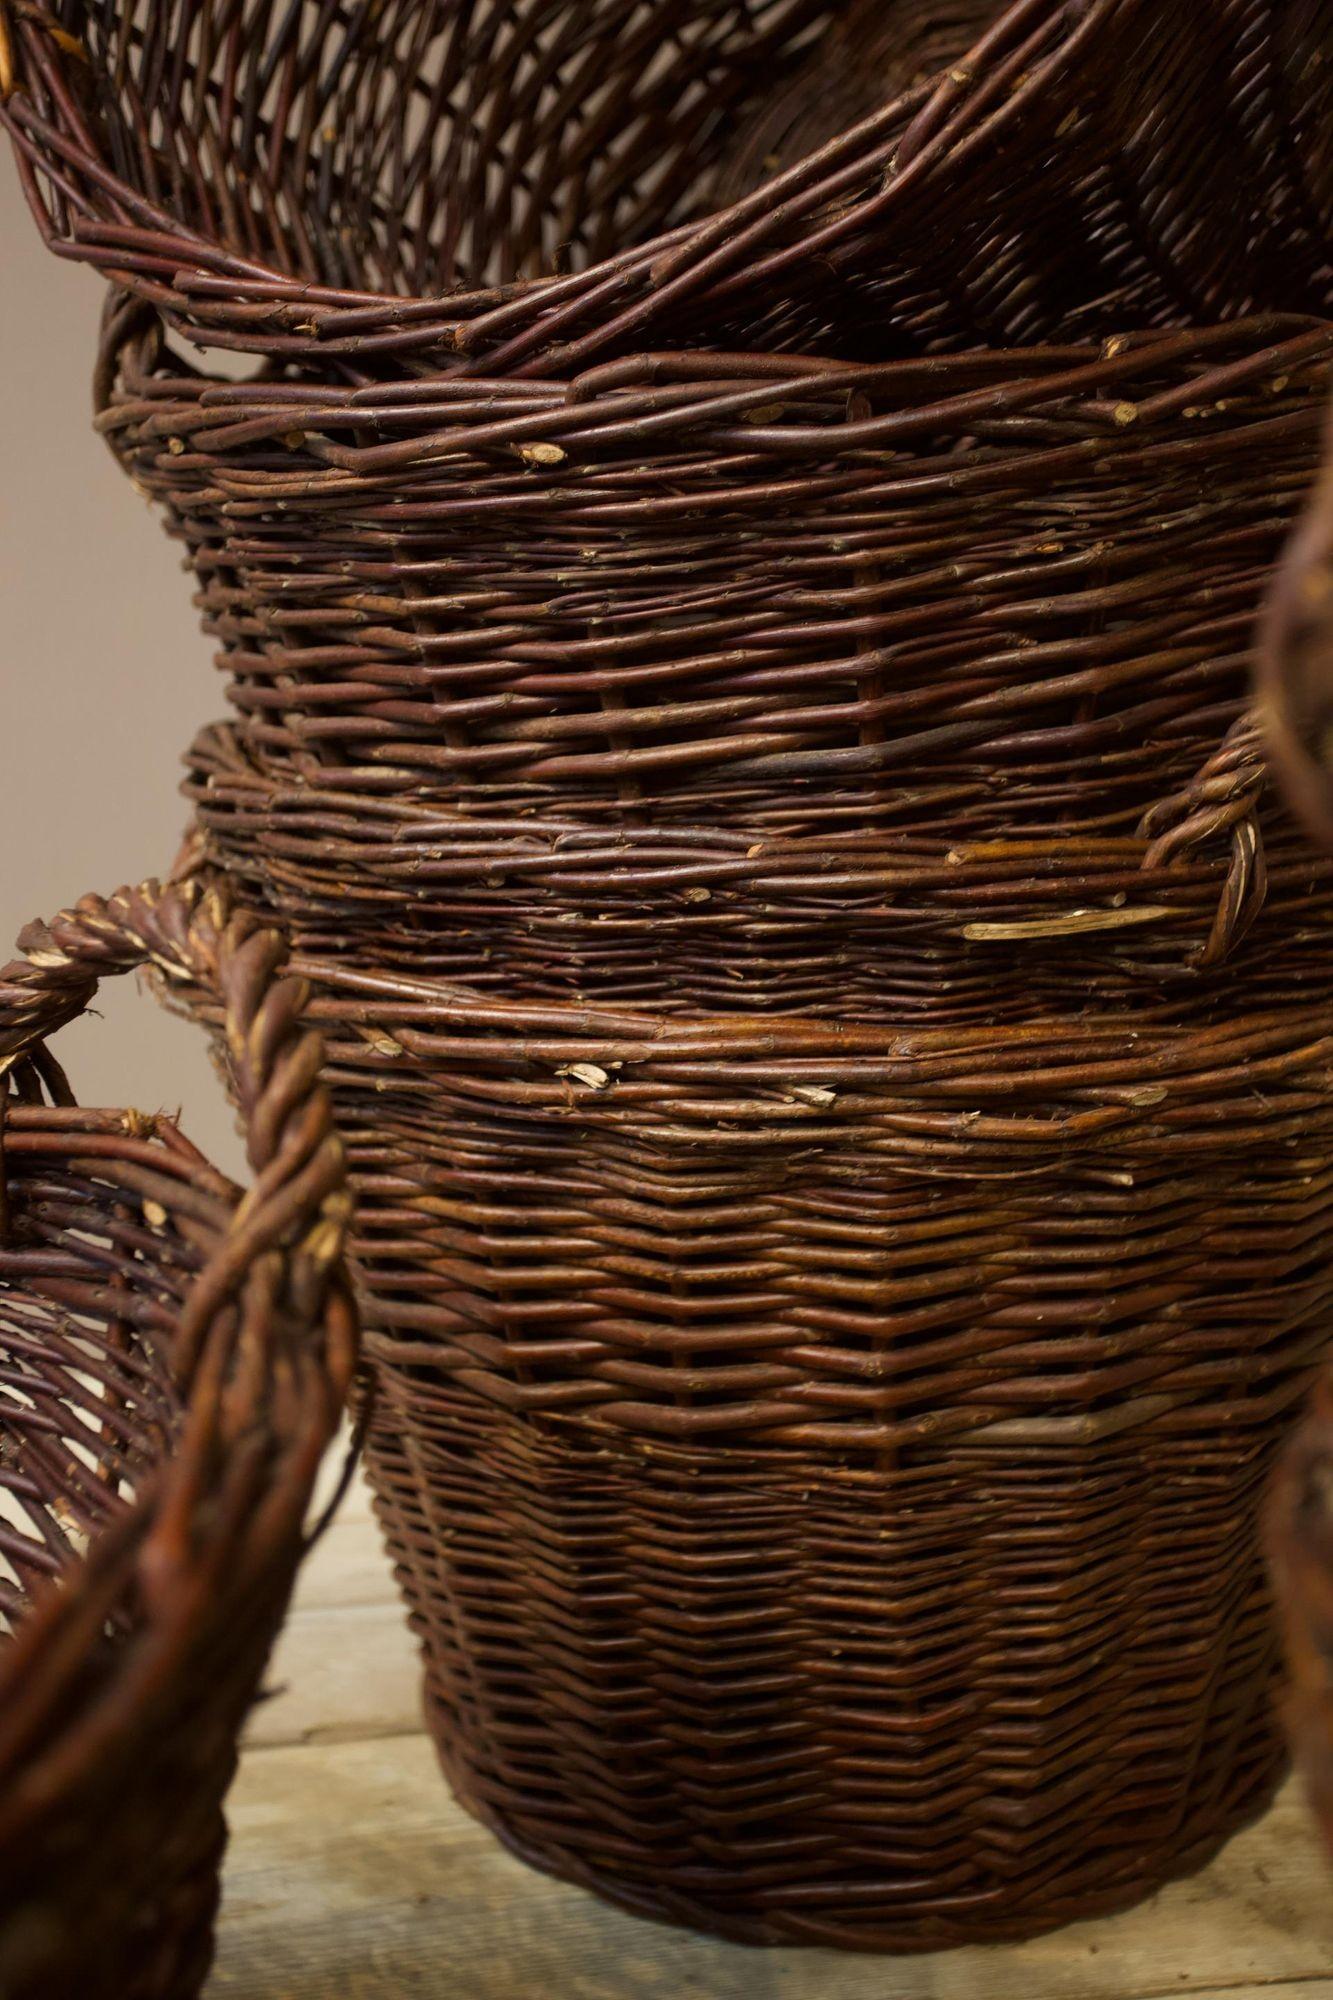 I have been very fortunate to get hold of a large collection of vintage willow log baskets from a country estate. Great overall condition with no worm or weak bases. Making these ideal for logs or blankets. The beauty in the way these are made is